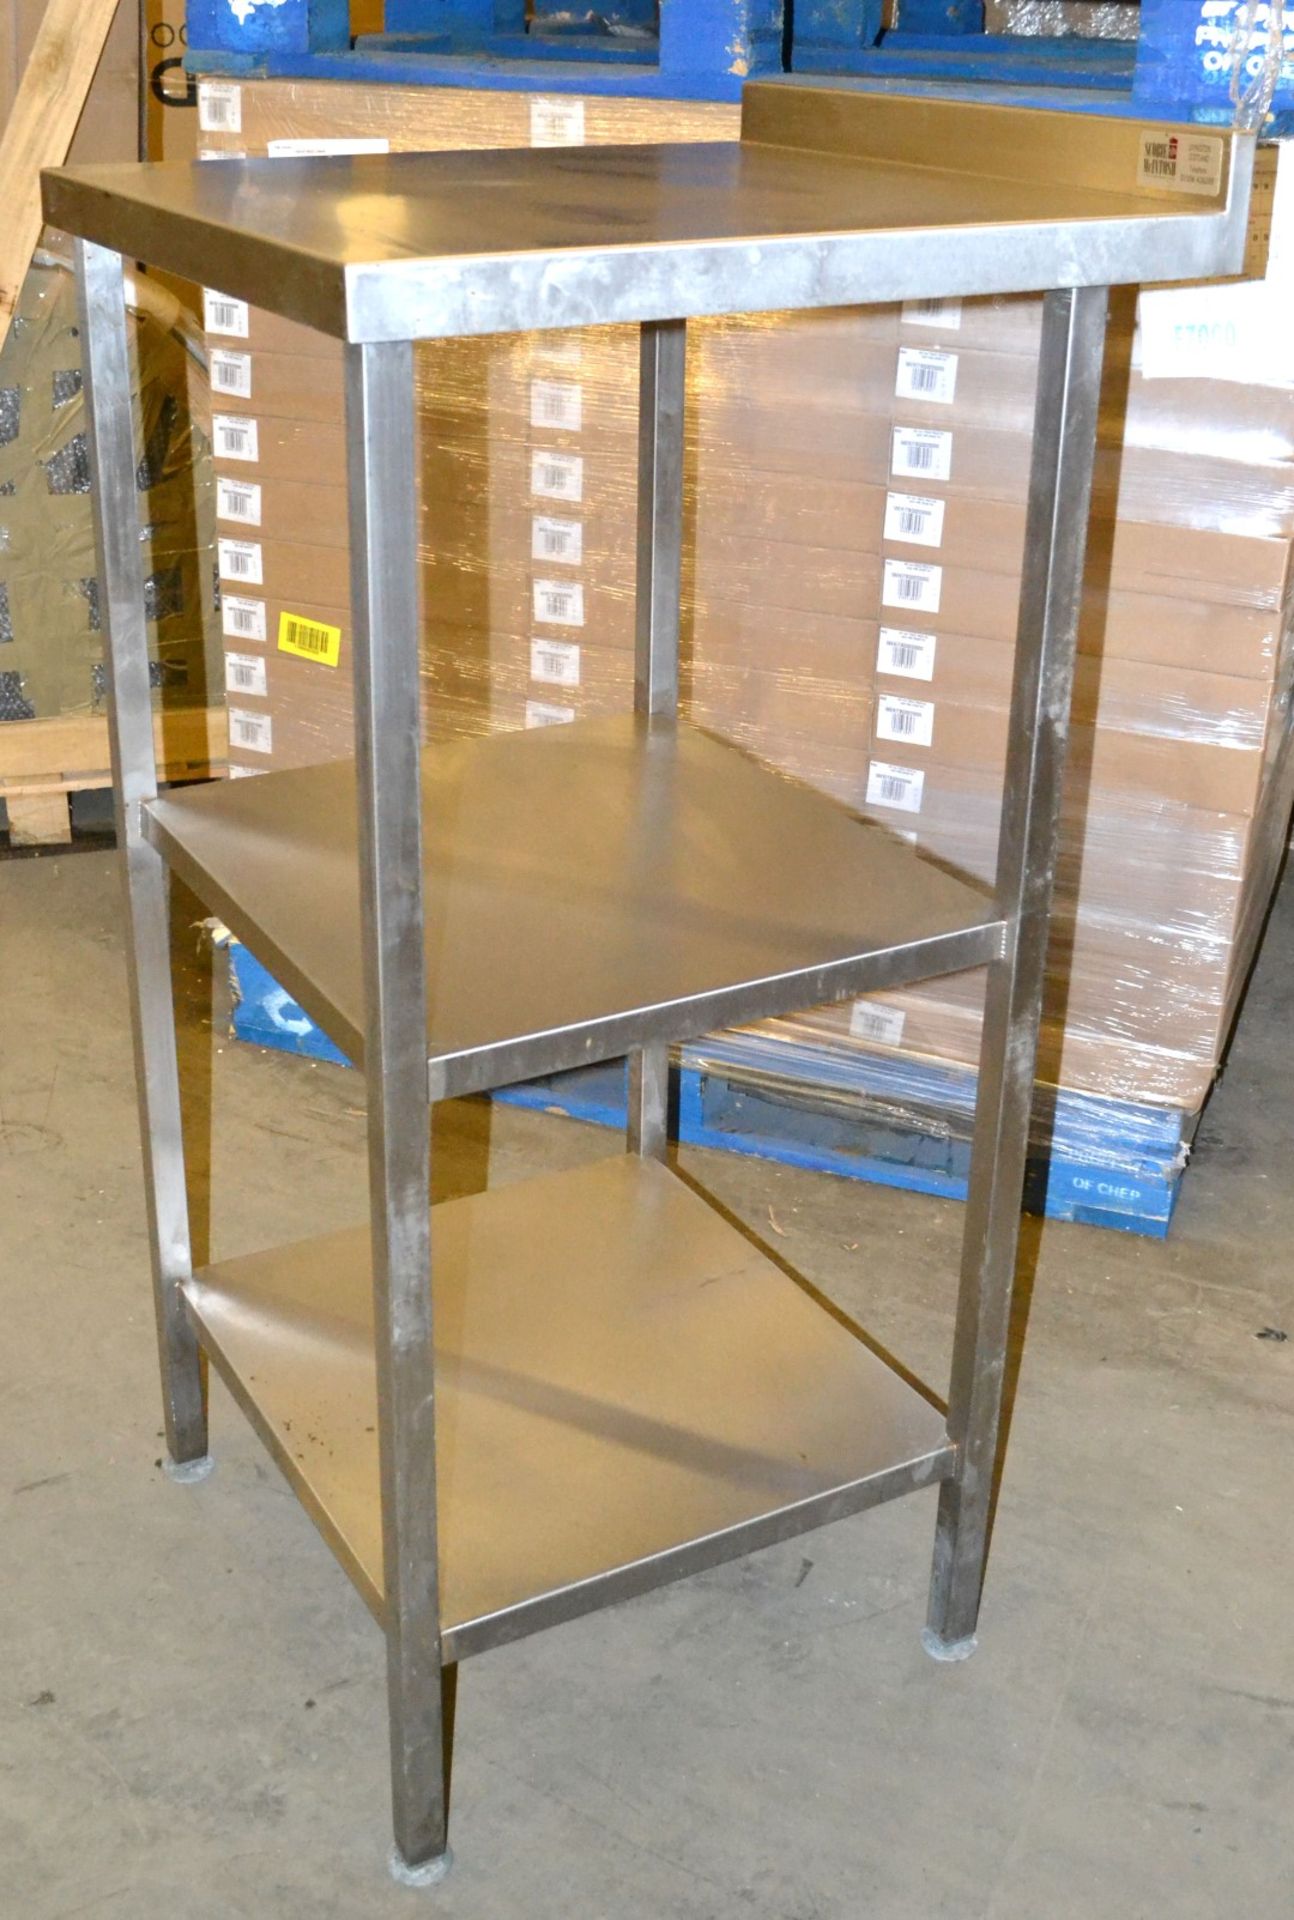 1 x Tall Stainless Steel Scobie McIntosh Prep Table - Dimensions: 60 x 65 x 124cm - Ref: MC115 - CL2 - Image 7 of 8